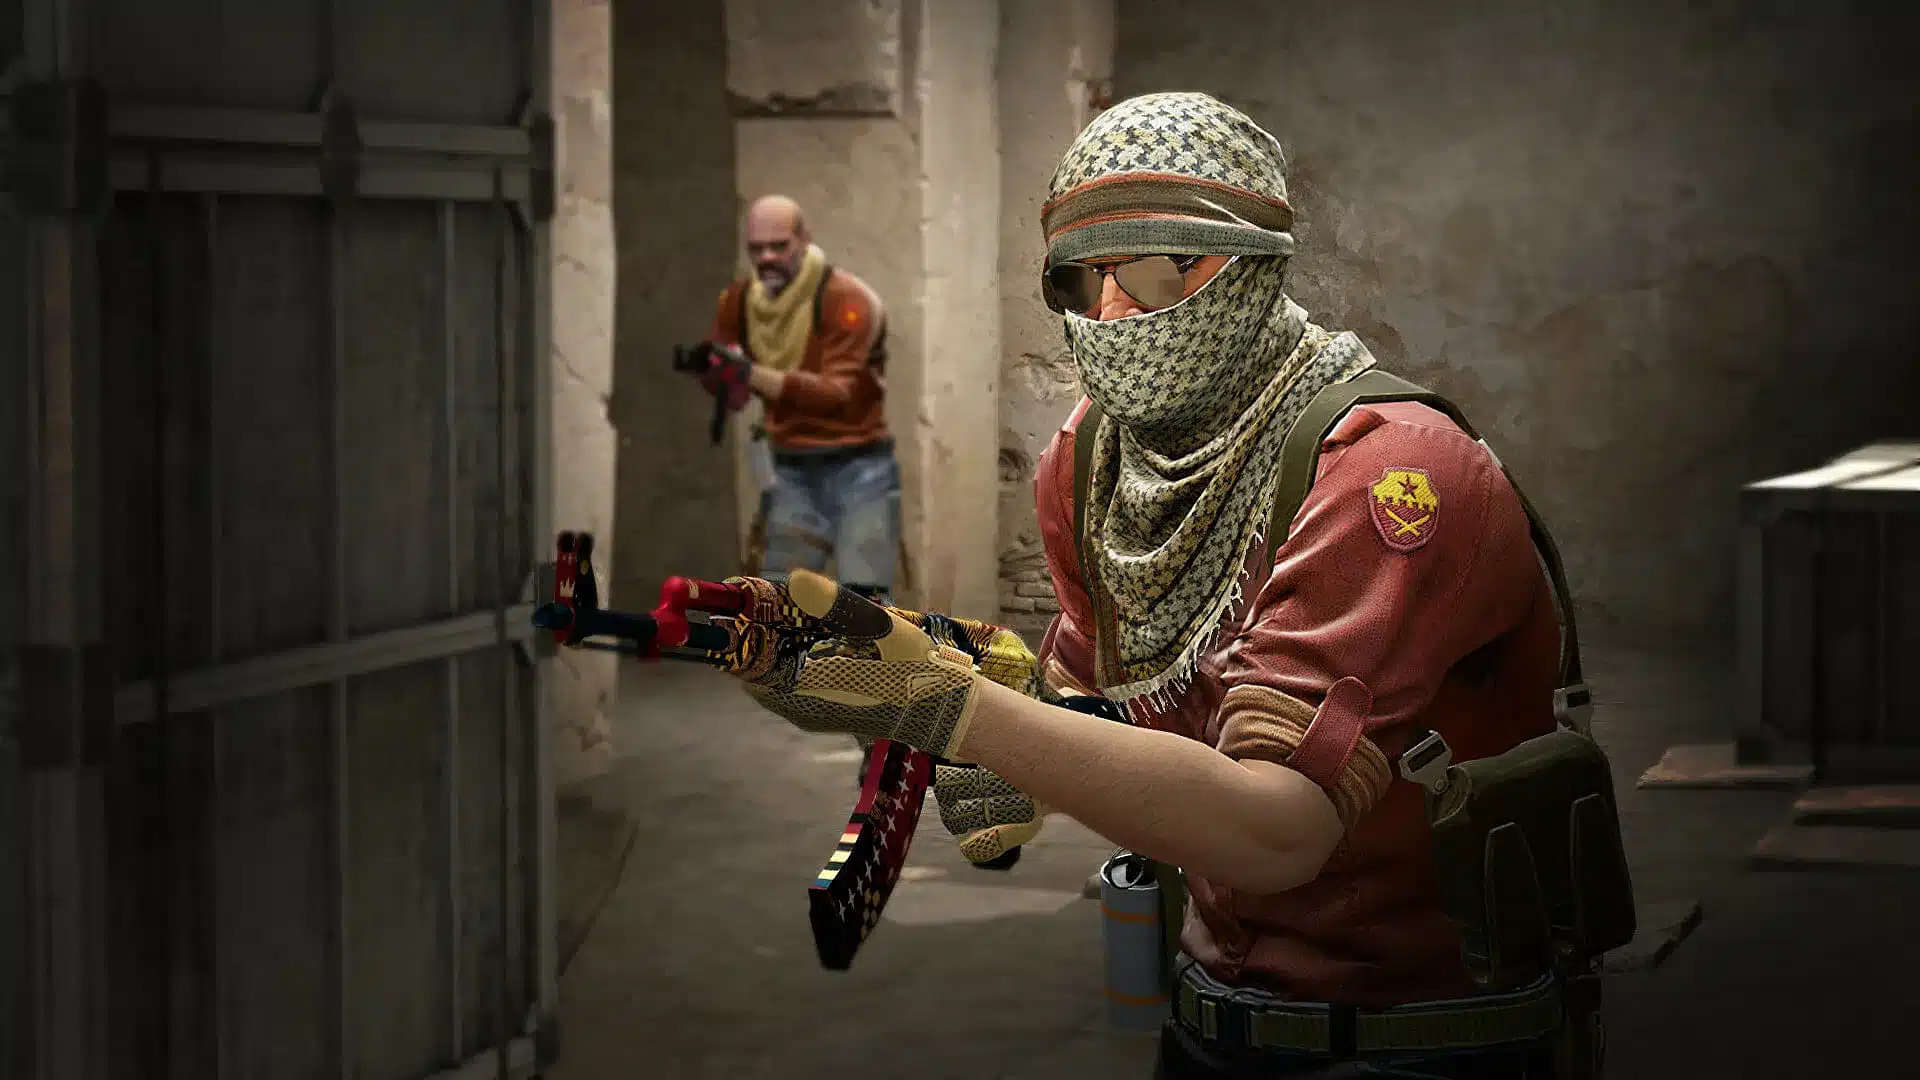 How is the buy menu changing with Counter-Strike 2? - The SportsRush